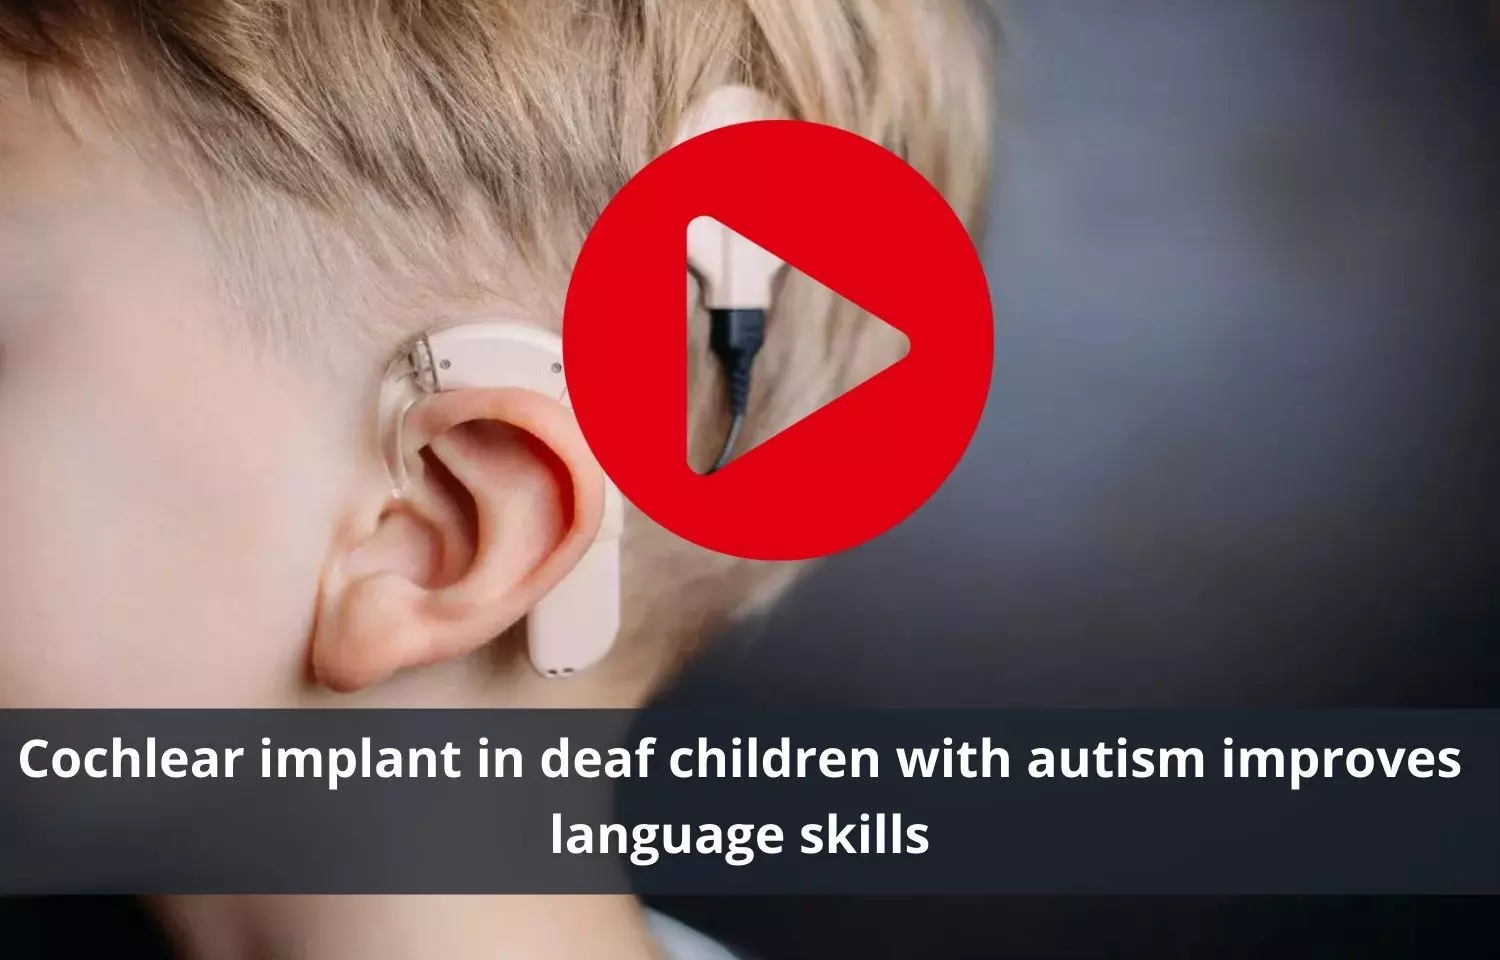 Deaf children with autism improved language skills with cochlear implant